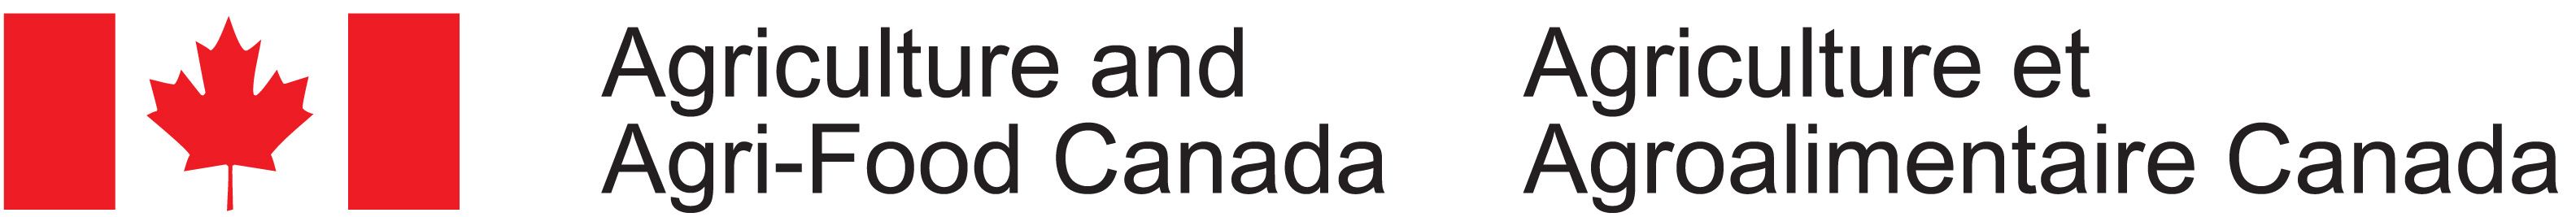 Agriculture and Agri-Food Canada | Agriculture et Agroalimentaire Canada